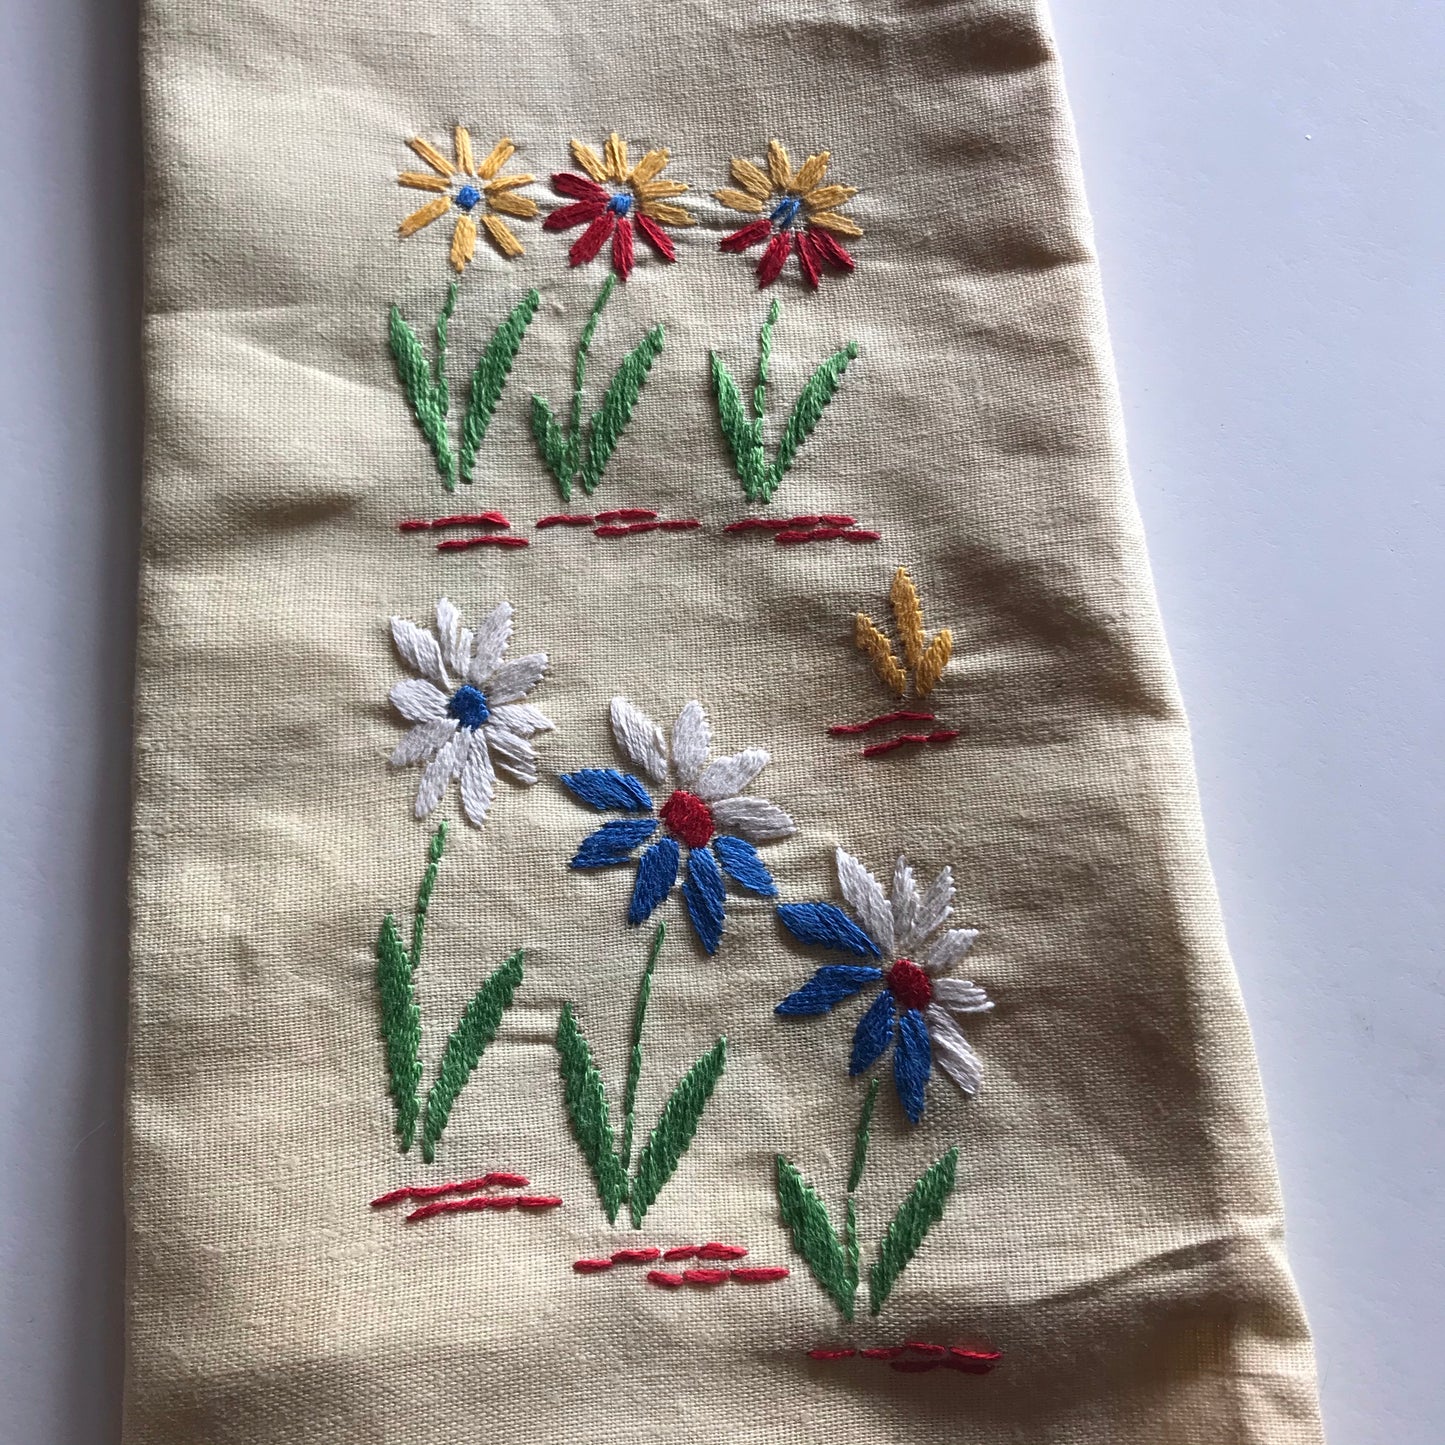 Buttercup Yellow Flower Embroidered Handkerchief circa 1940s